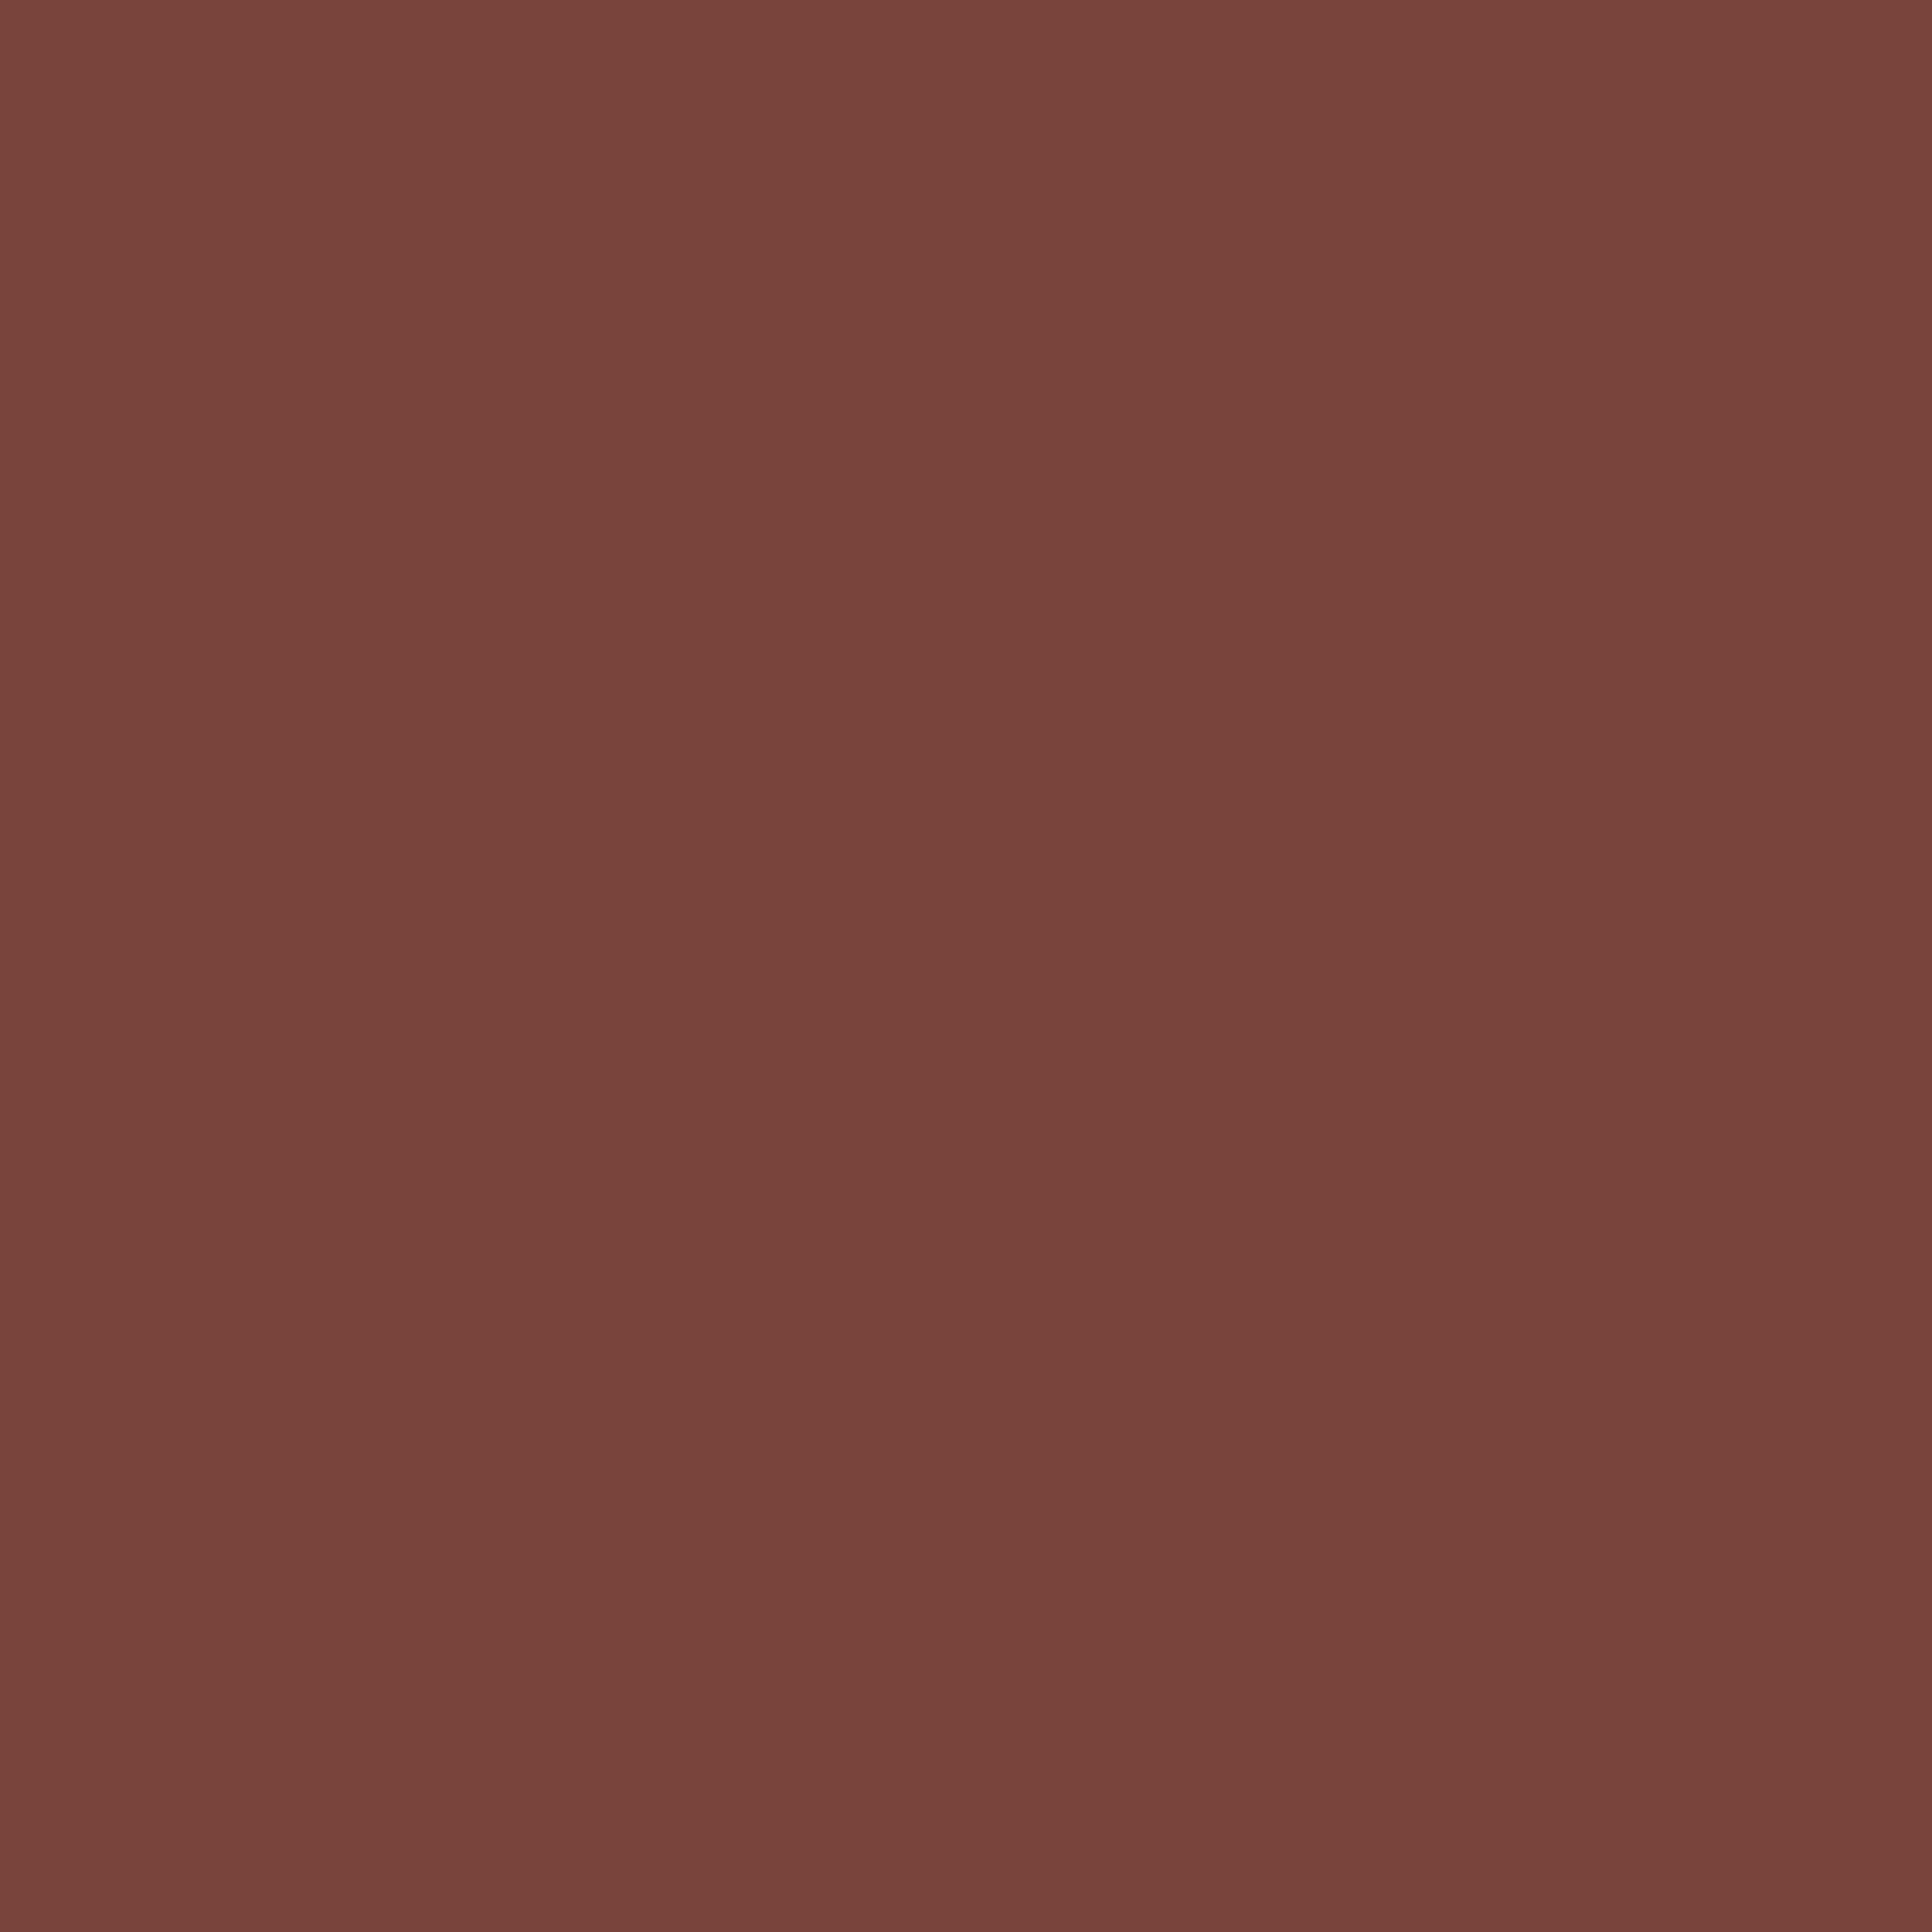 3600x3600 Medium Tuscan Red Solid Color Background